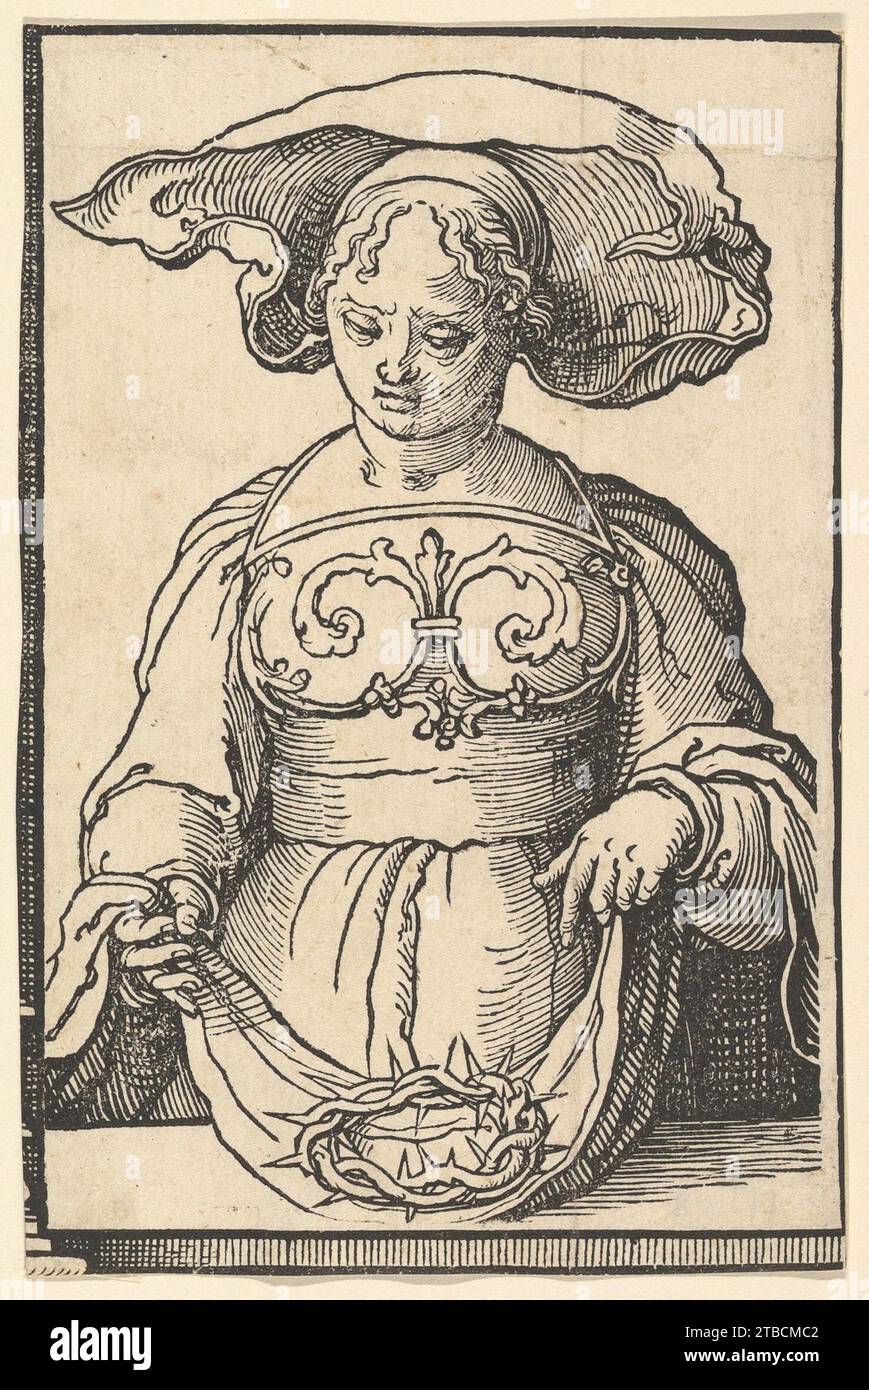 Delphic Sibyl, from the series of Sibyls 1937 by Lucas van Leyden Stock Photo